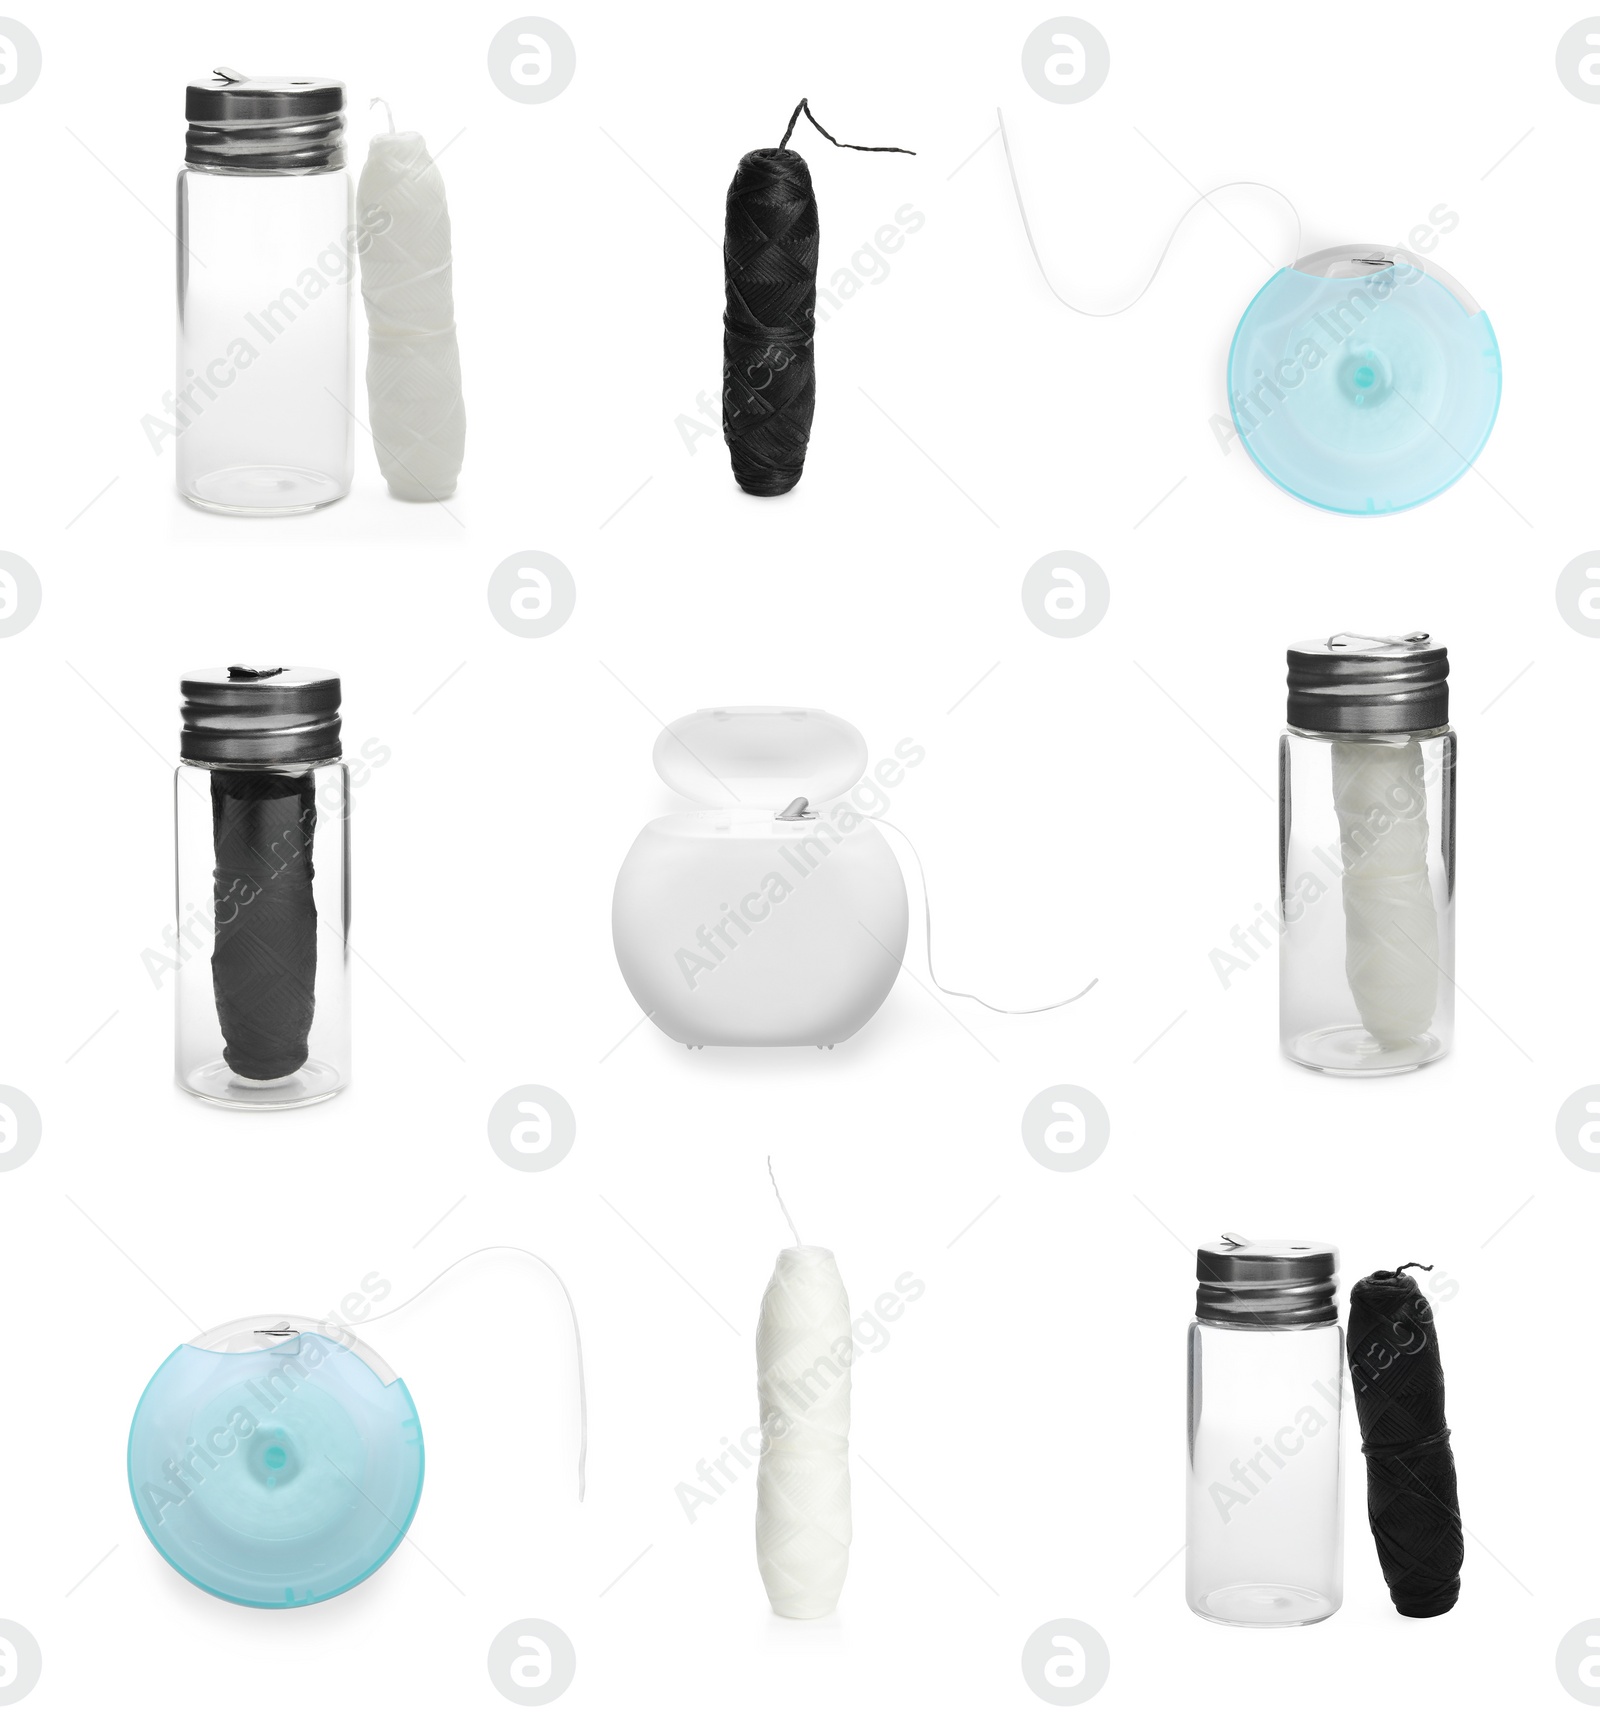 Image of Set of different dental flosses on white background